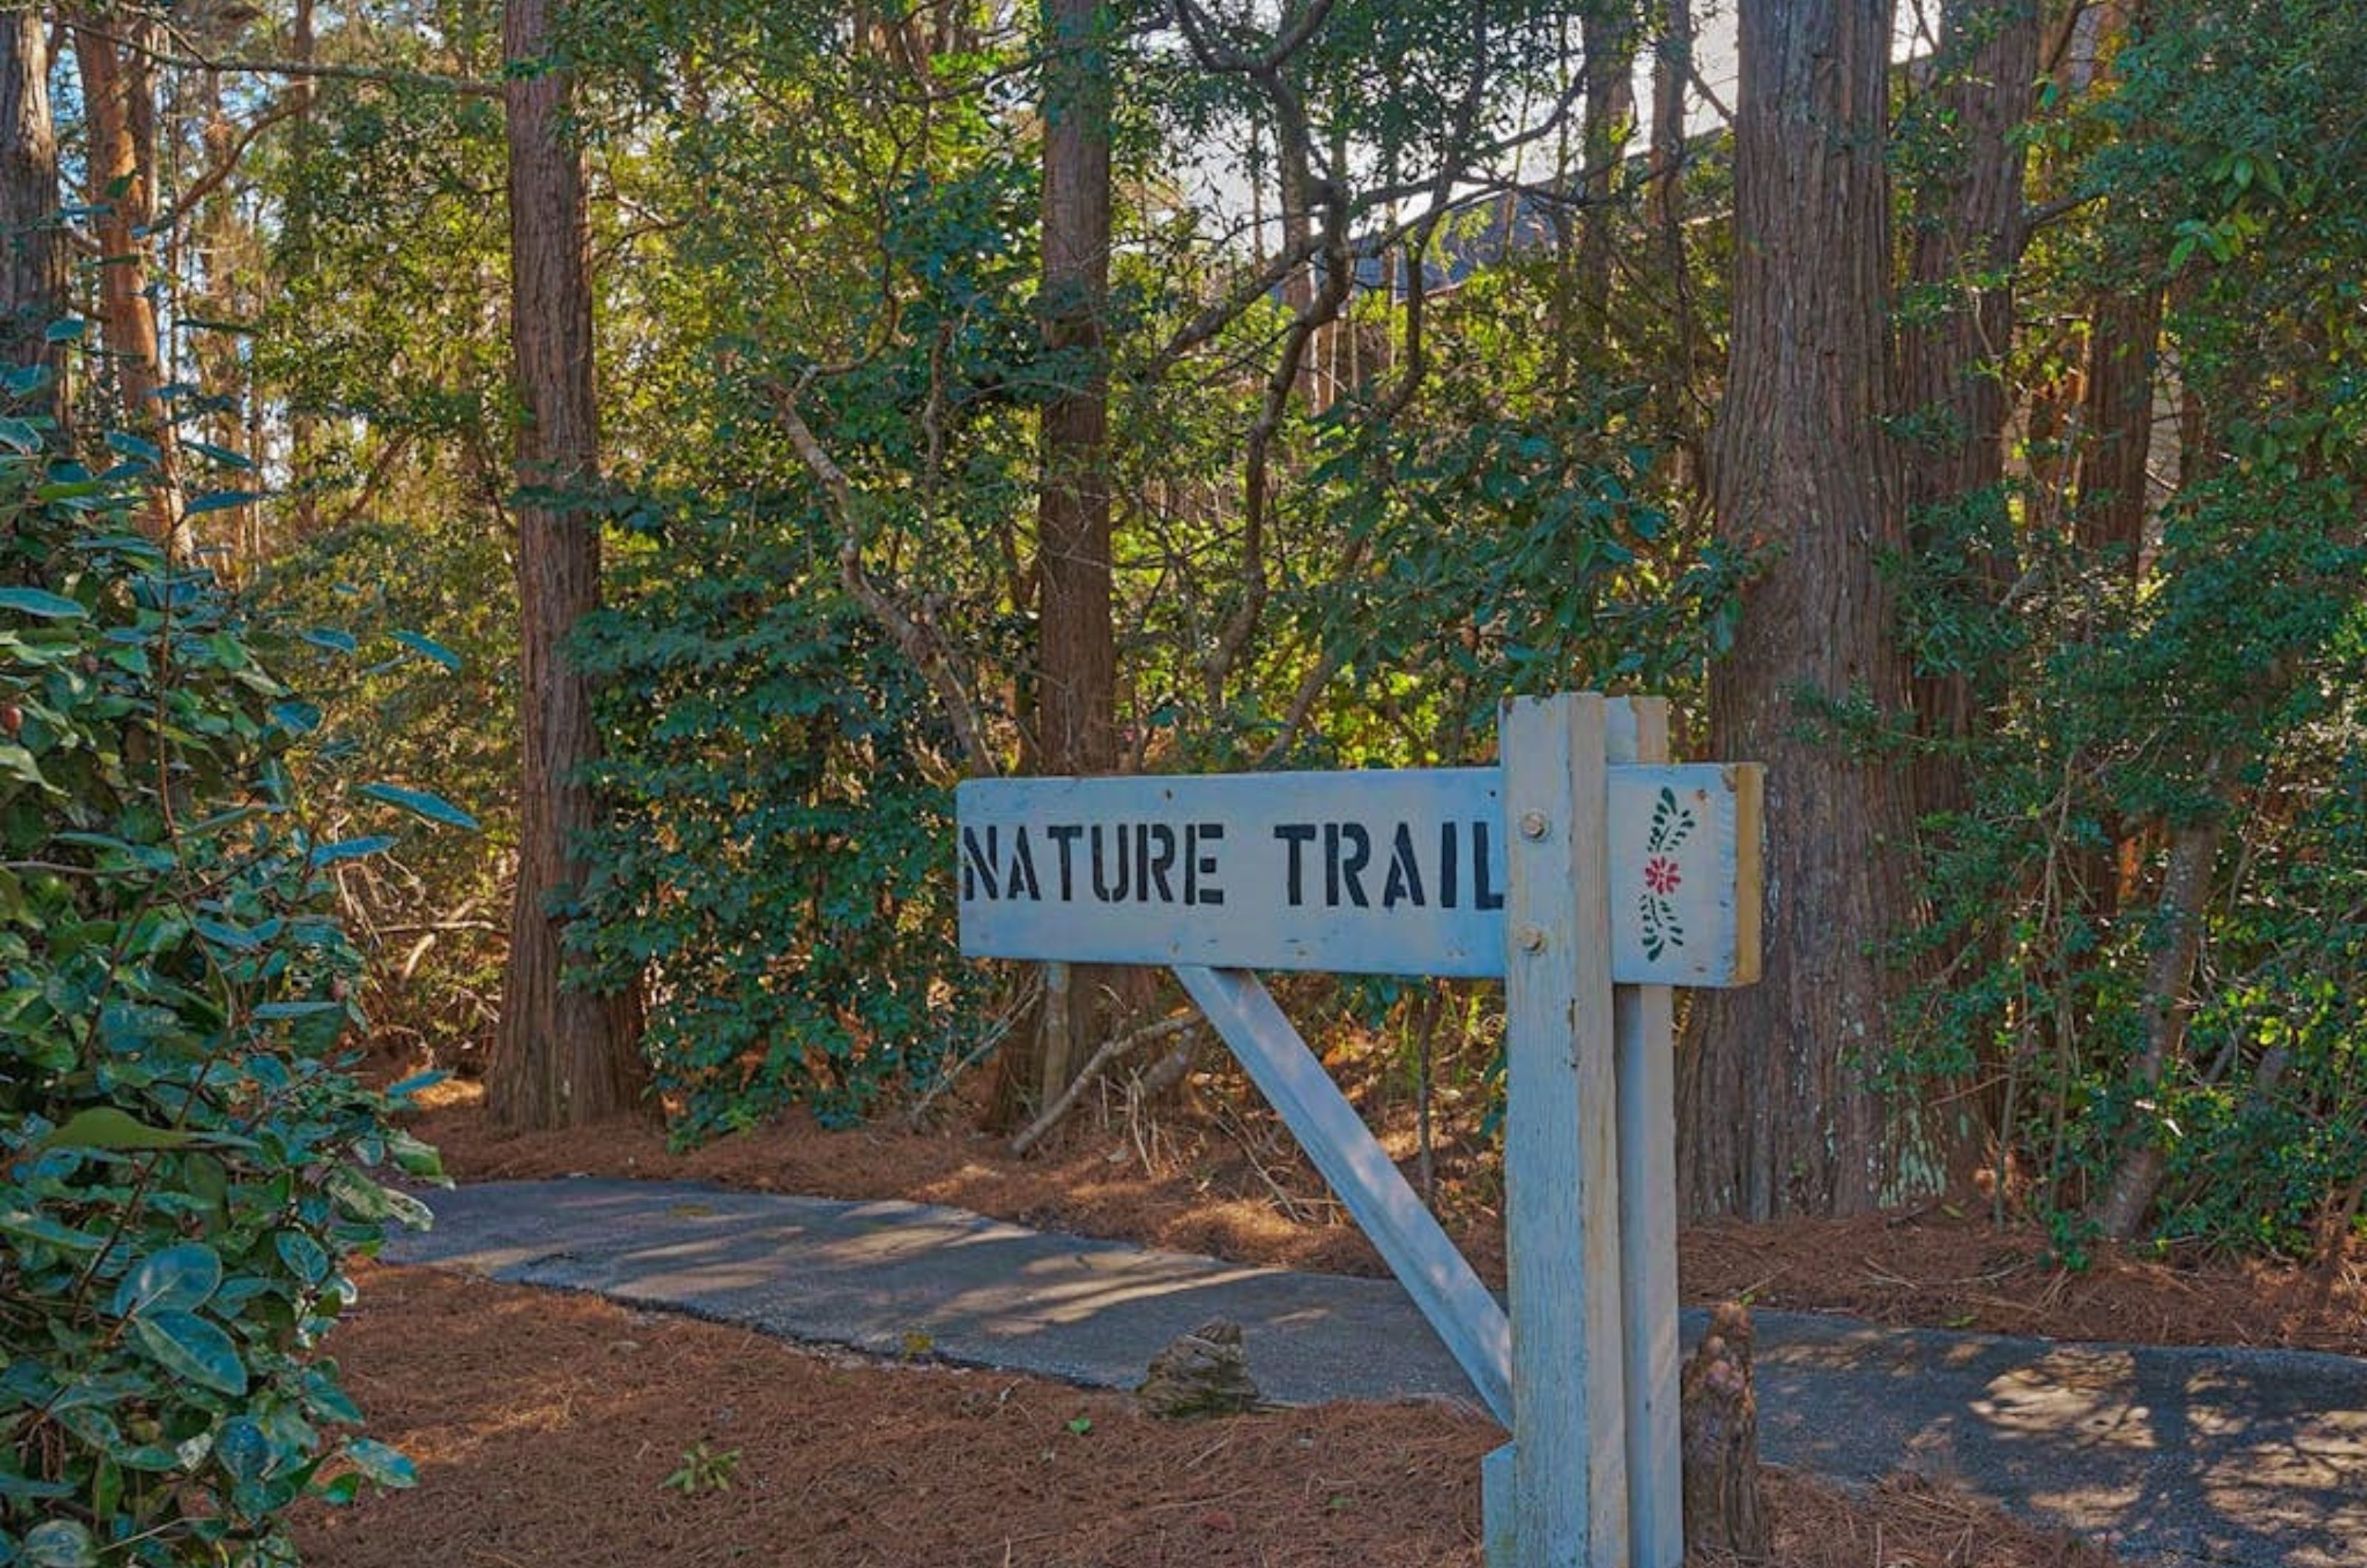 A wooden post sign for a nature trail surrounded by trees and a gravel pathway 